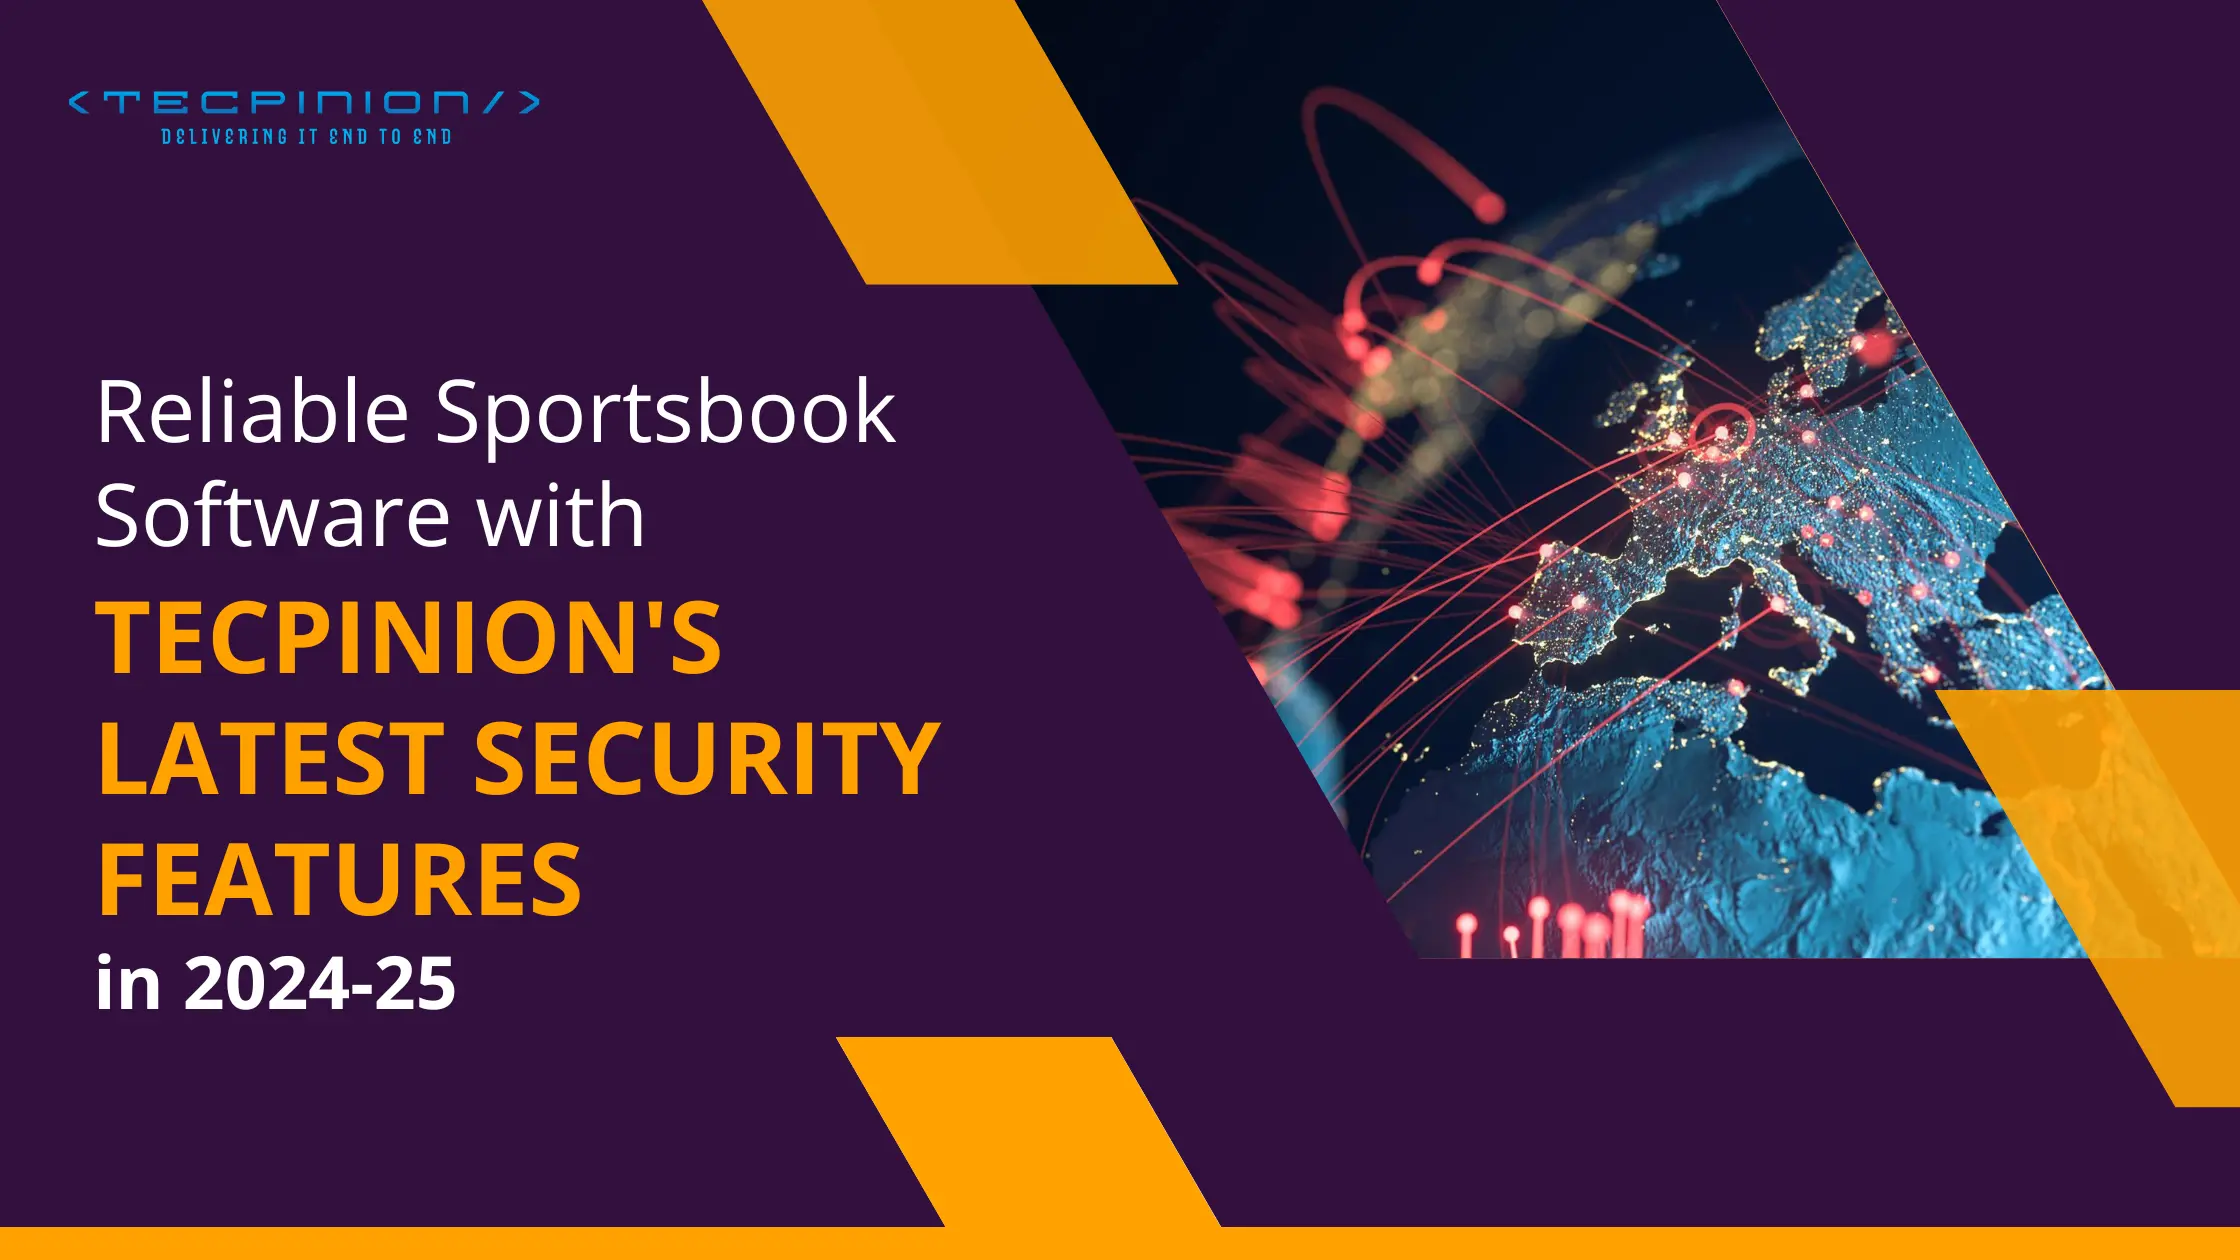 Reliable Sportsbook Software with Tecpinion’s Latest Security Features in 2024-25